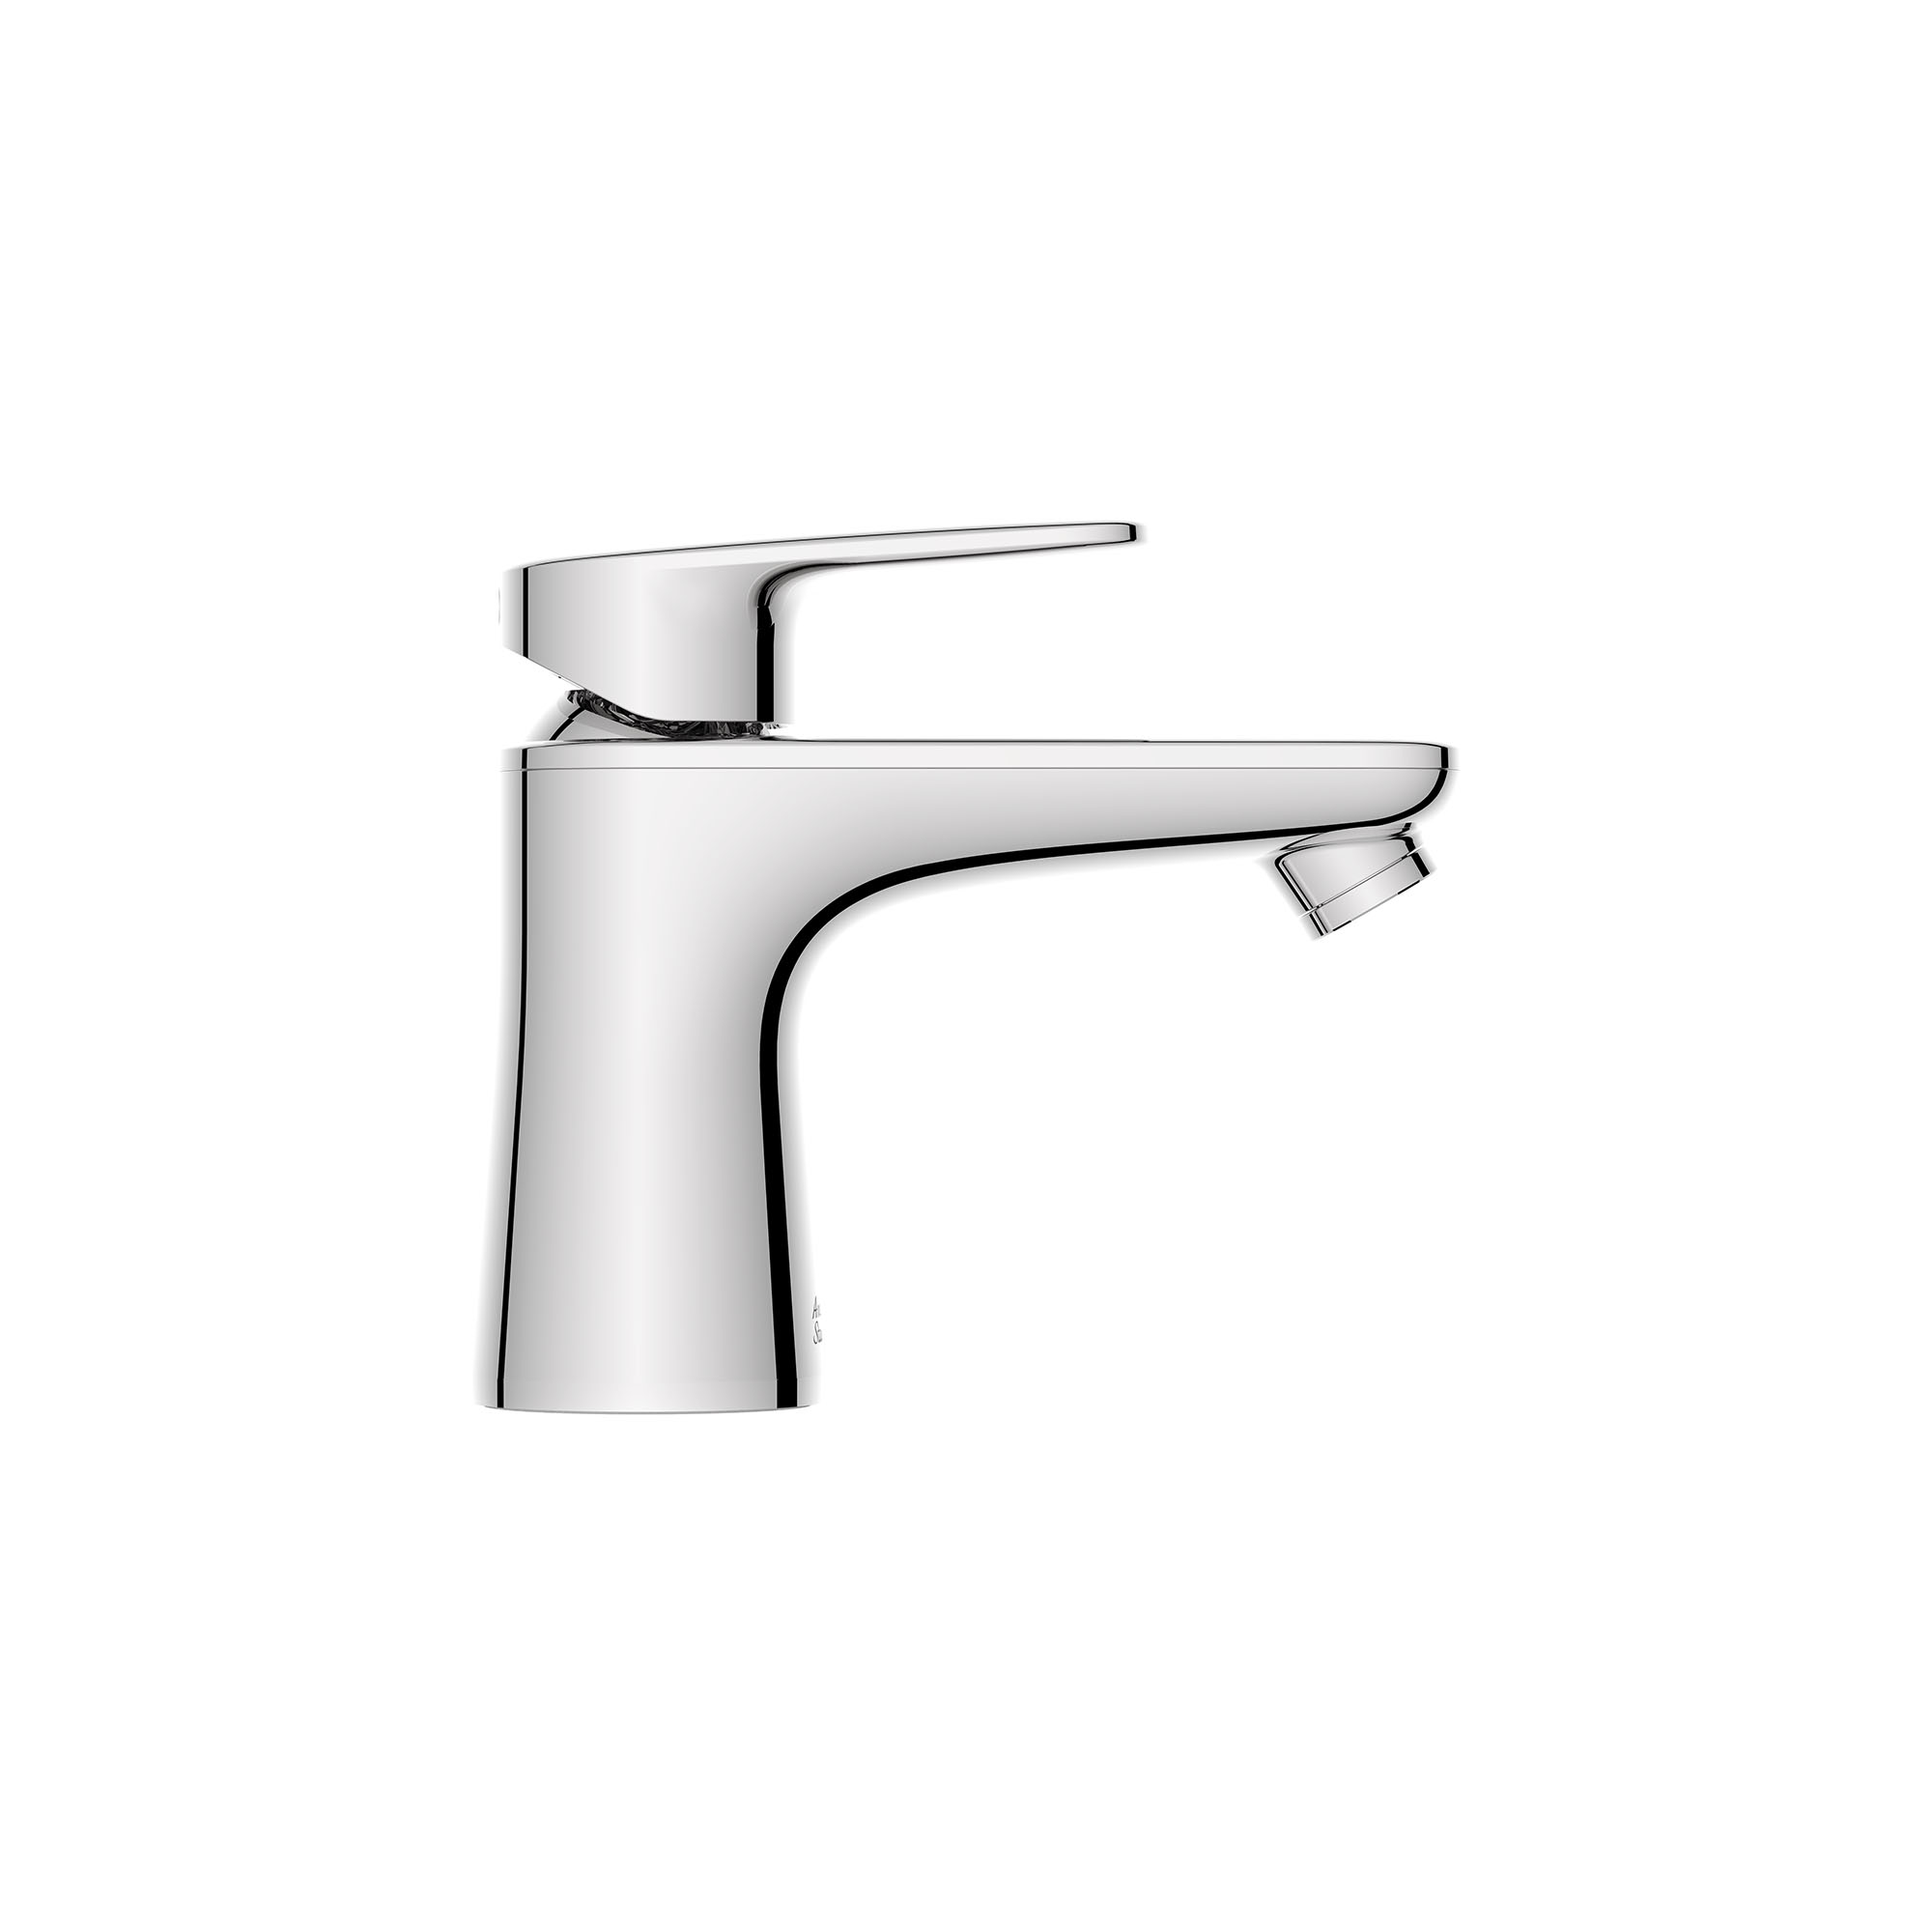 Aspirations™ Single-Handle Petite Bathroom Faucet 1.2 gpm/ 4.5 L/min With Lever Handle